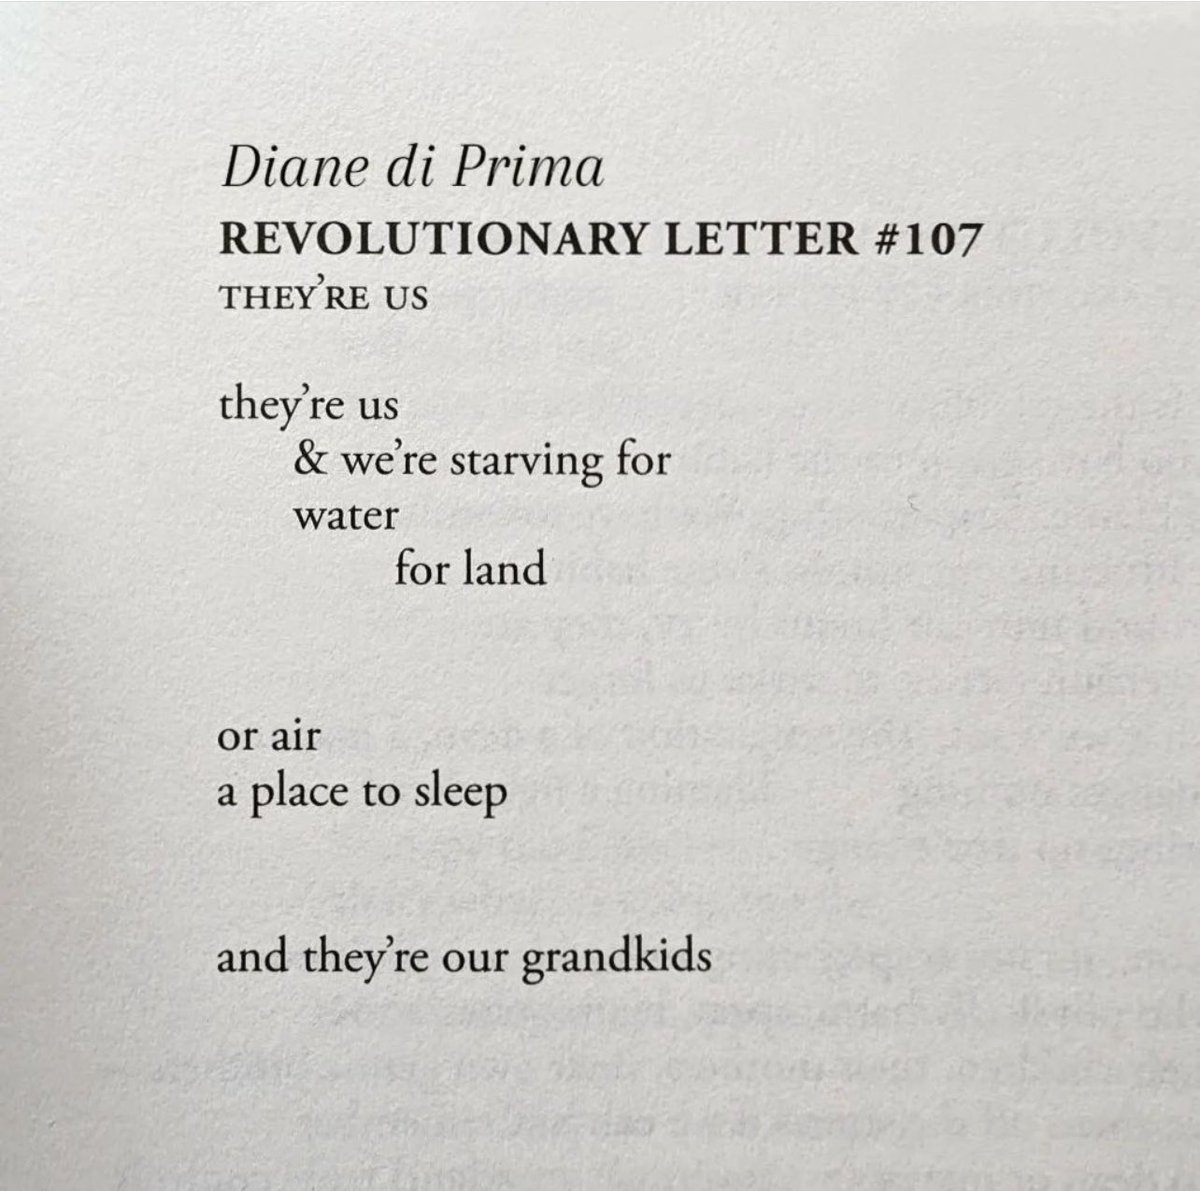 Diane di Prima
REVOLUTIONARY LETTER #107
THEY'RE US
they're us
& we're starving for
water
for land
or air
a place to sleep
and they're our grandkids
From Revolutionary Letters
The Pocket Poet Series: Number 27
@citylightsbooks 1971.
#dianediprima
#poems of #revolution